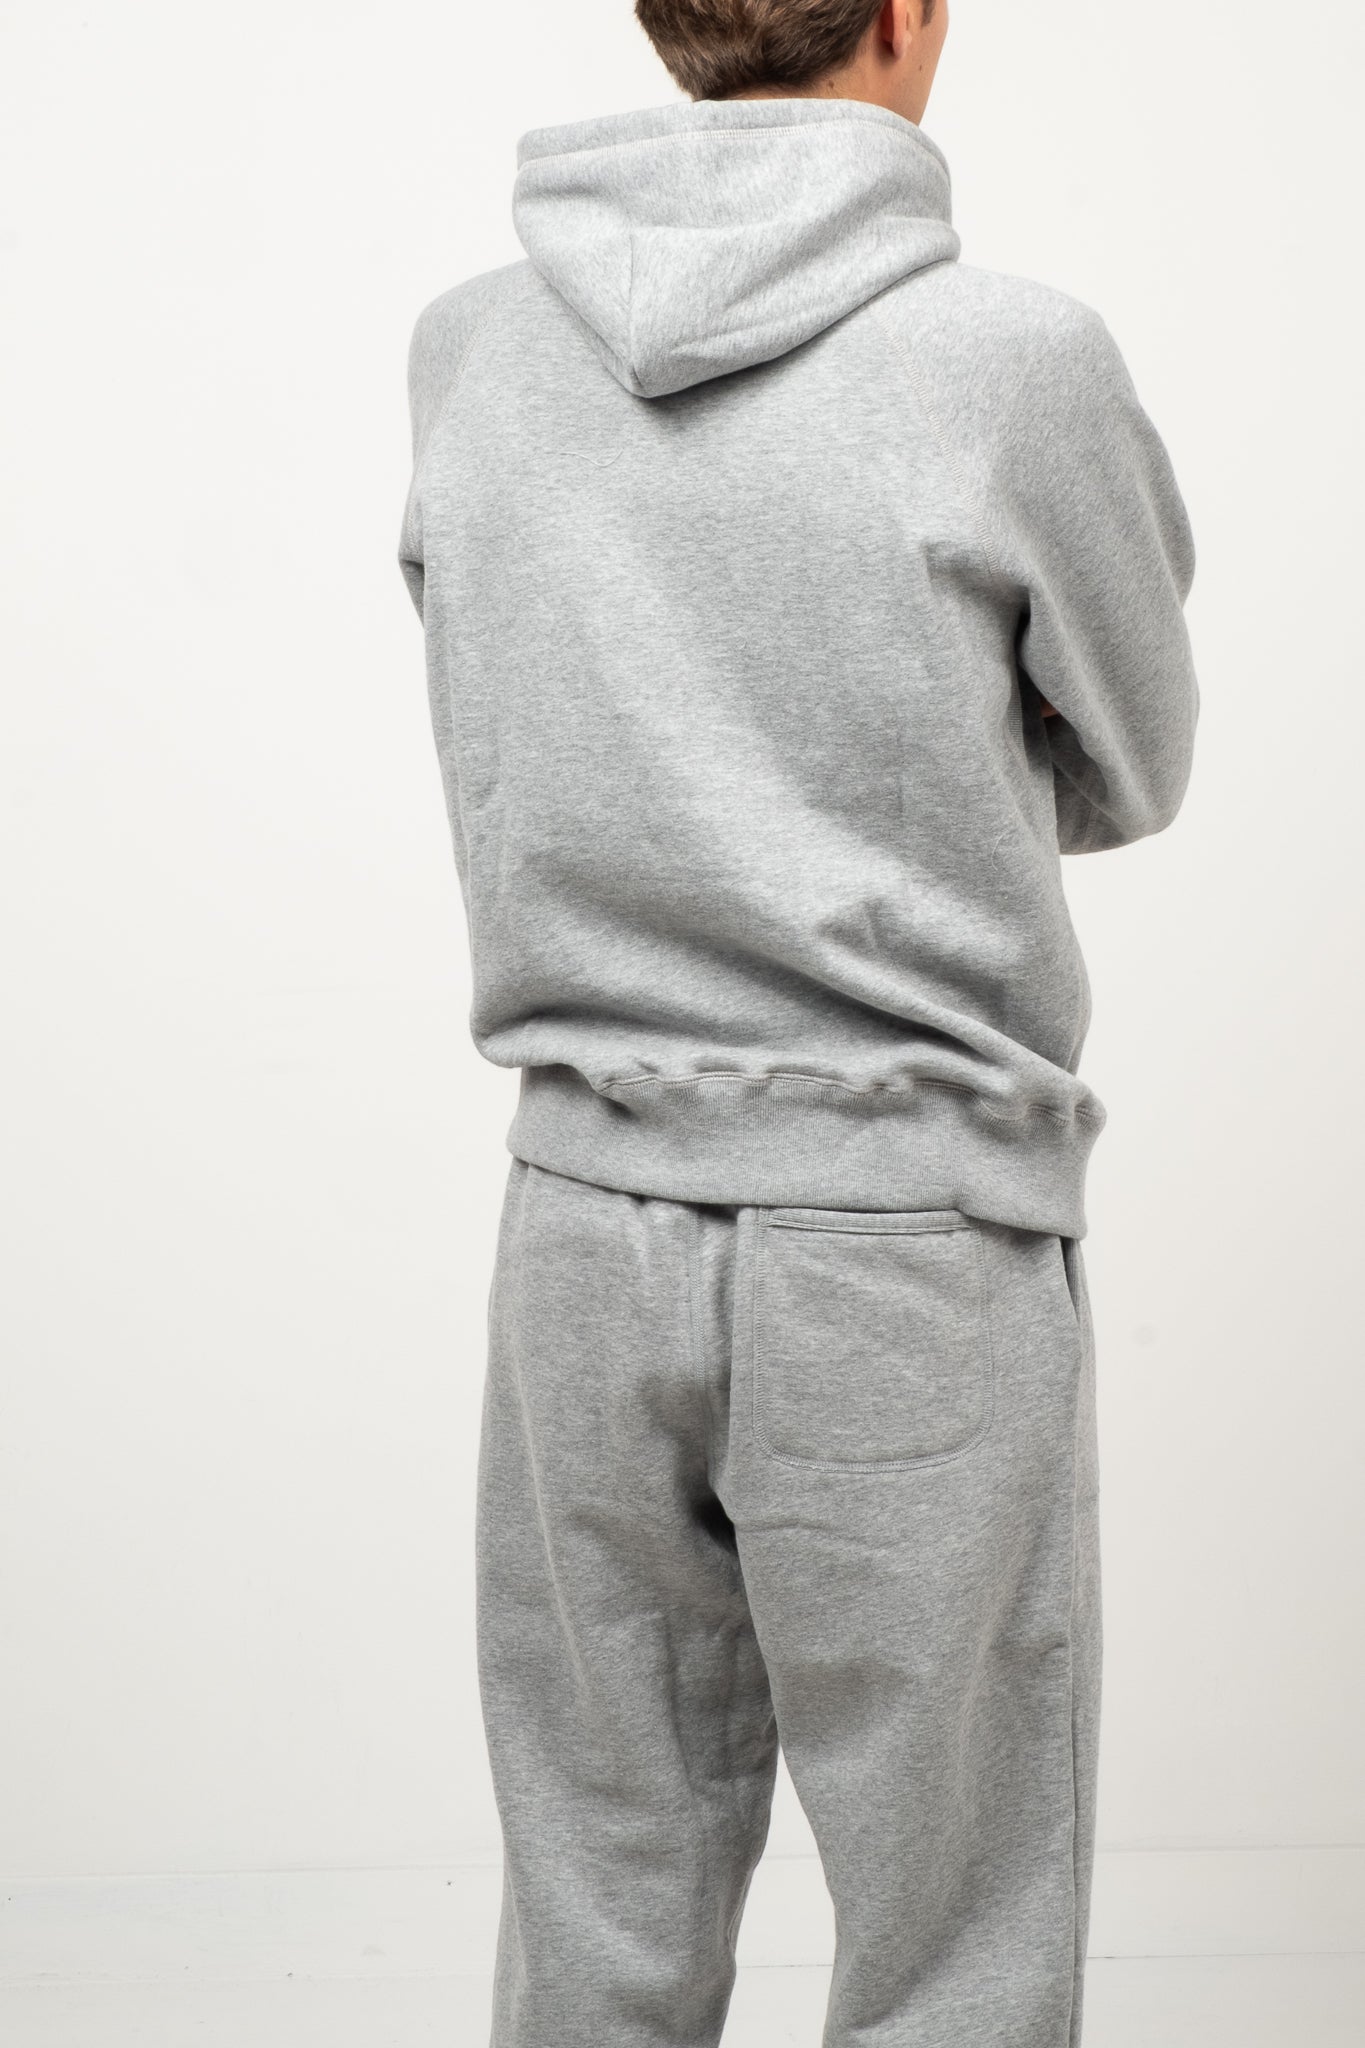 Step-Up Sweatpants Deliberate Casual - Heather Grey